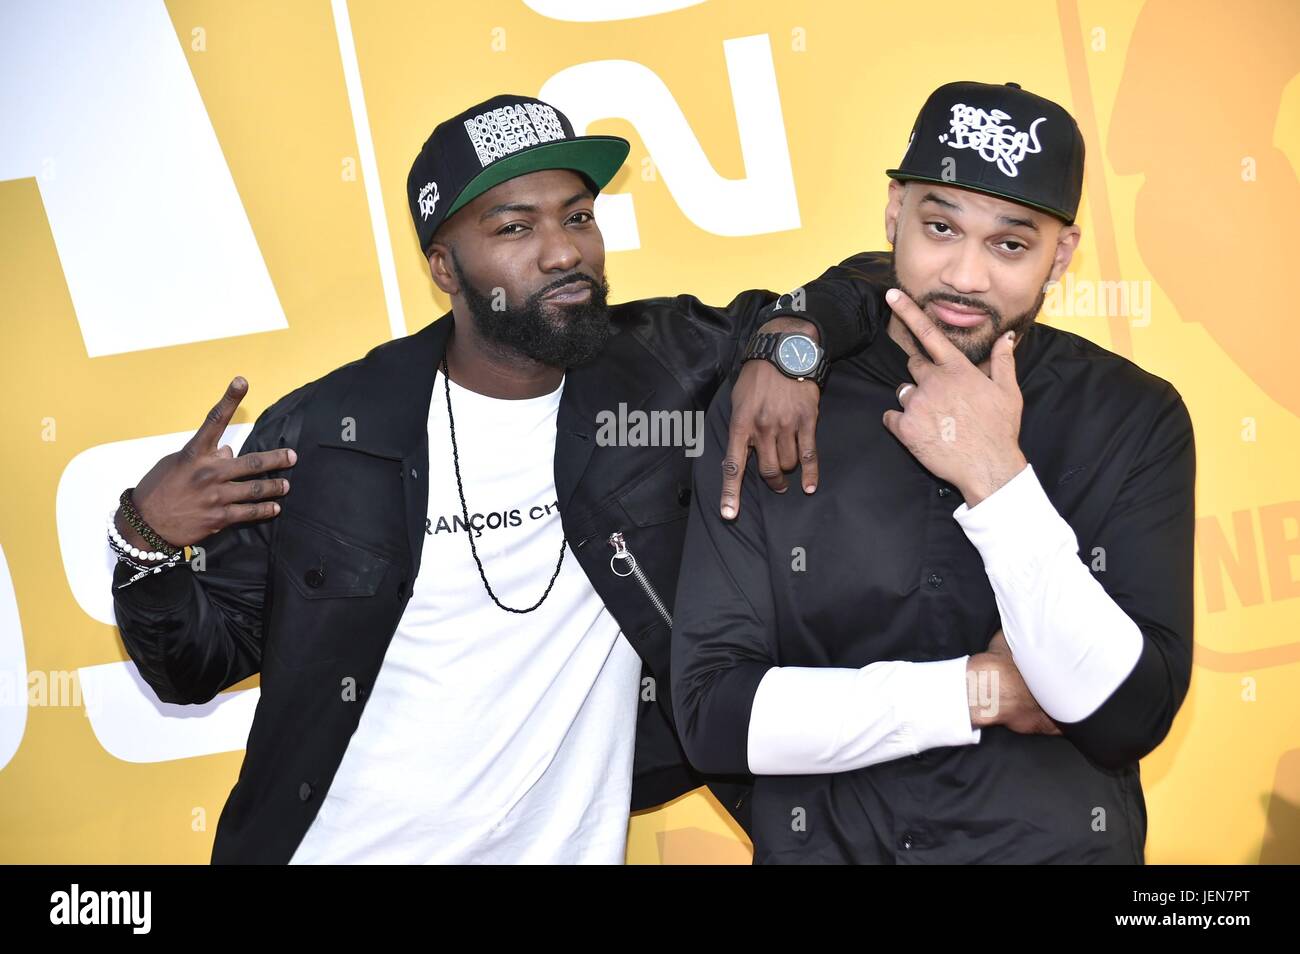 New York, NY, USA. 26th June, 2017. Desus, The Kid Mero at arrivals for 2017 NBA Awards on TNT, Basketball City at Pier 36, New York, NY June 26, 2017. Credit: Steven Ferdman/Everett Collection/Alamy Live News Stock Photo